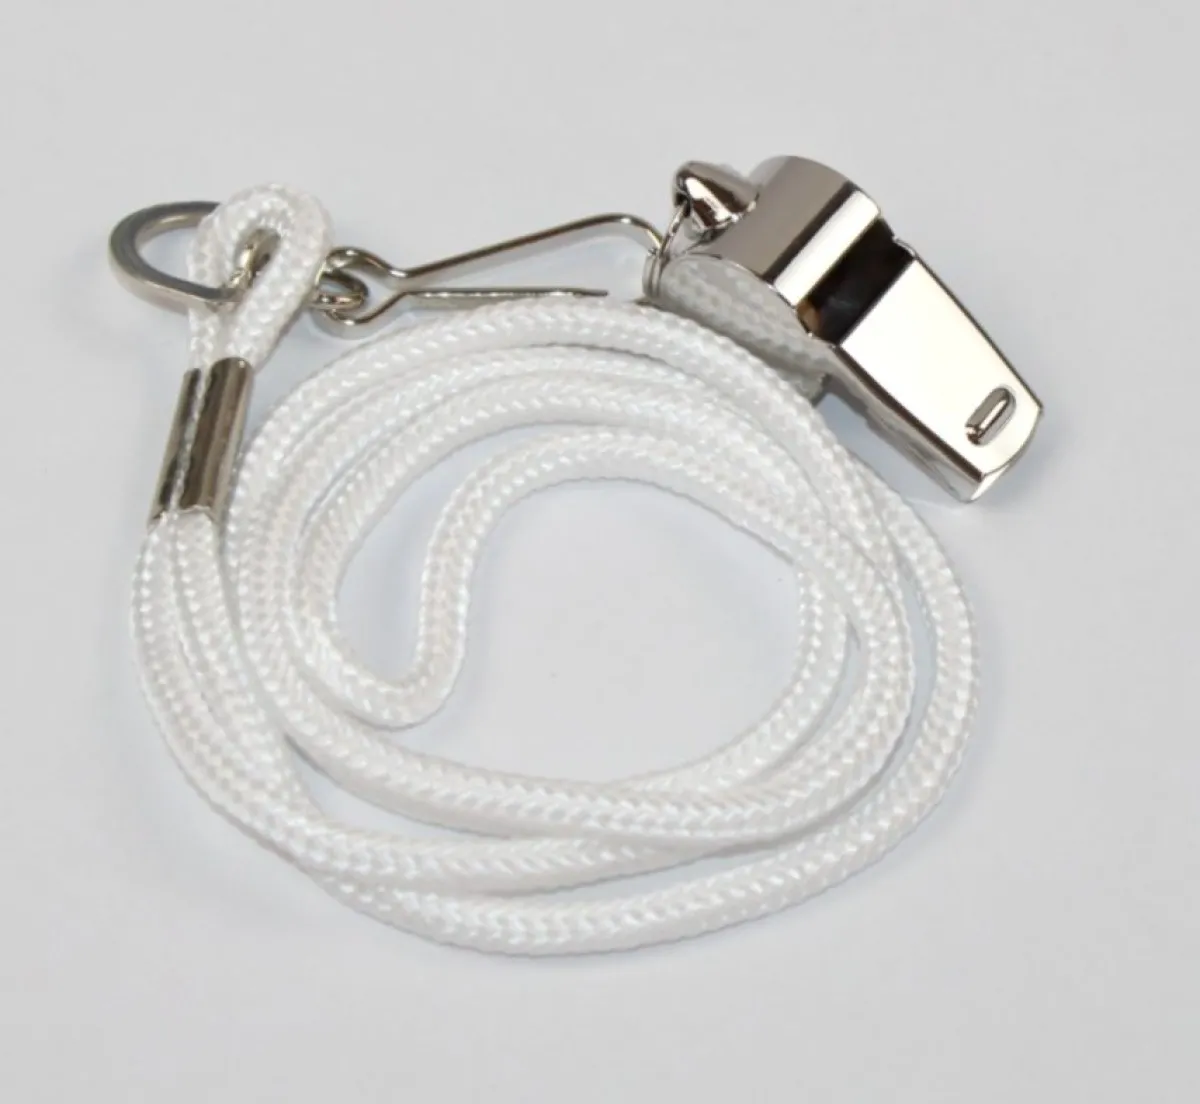 whistle with white band